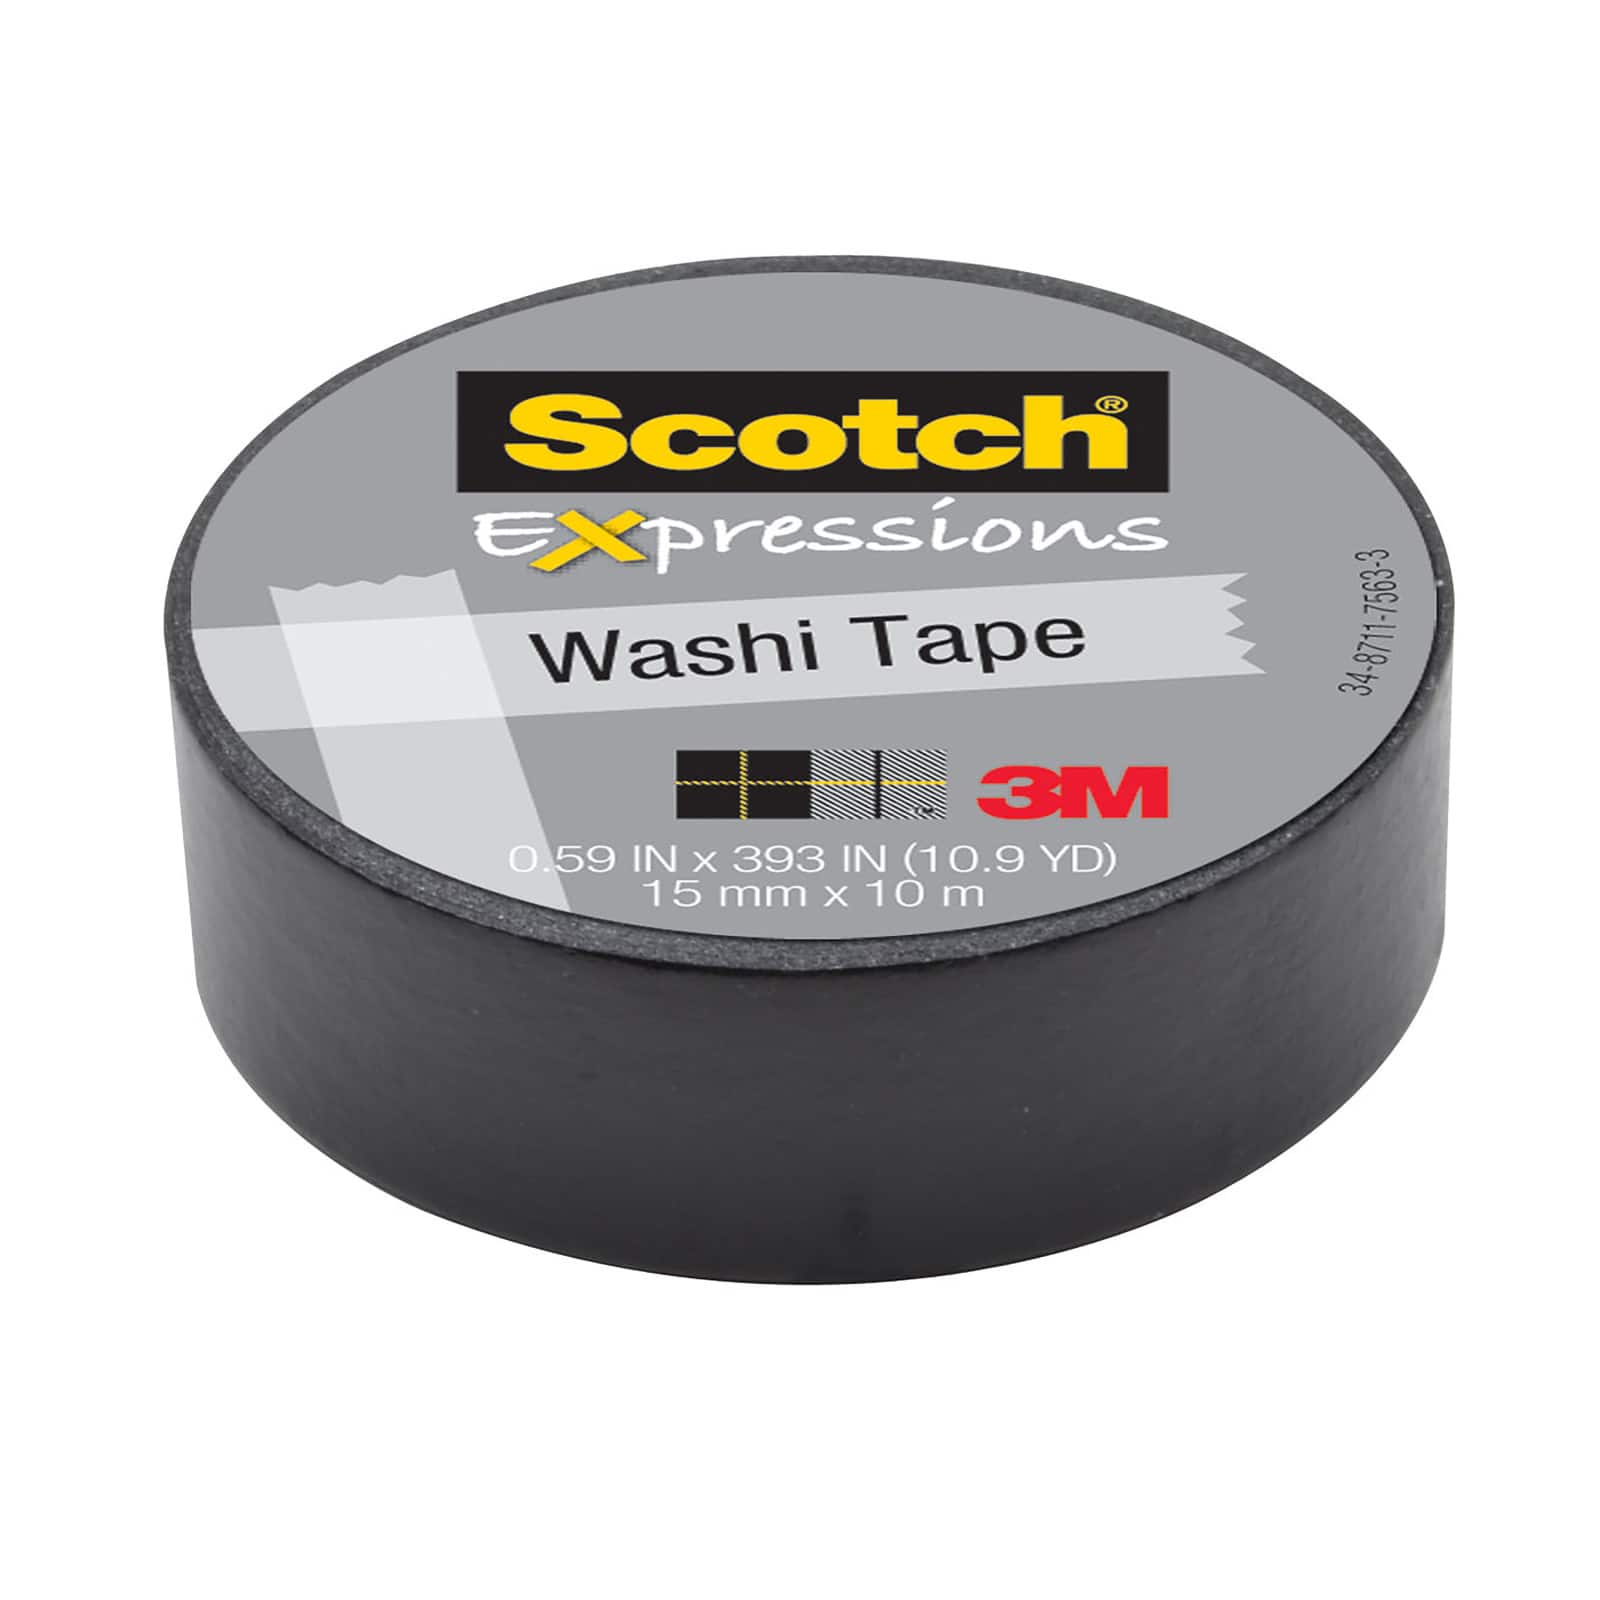 Scotch Expressions Tapes Club Pack, Decorative Washi Tape Collection -  Sam's Club